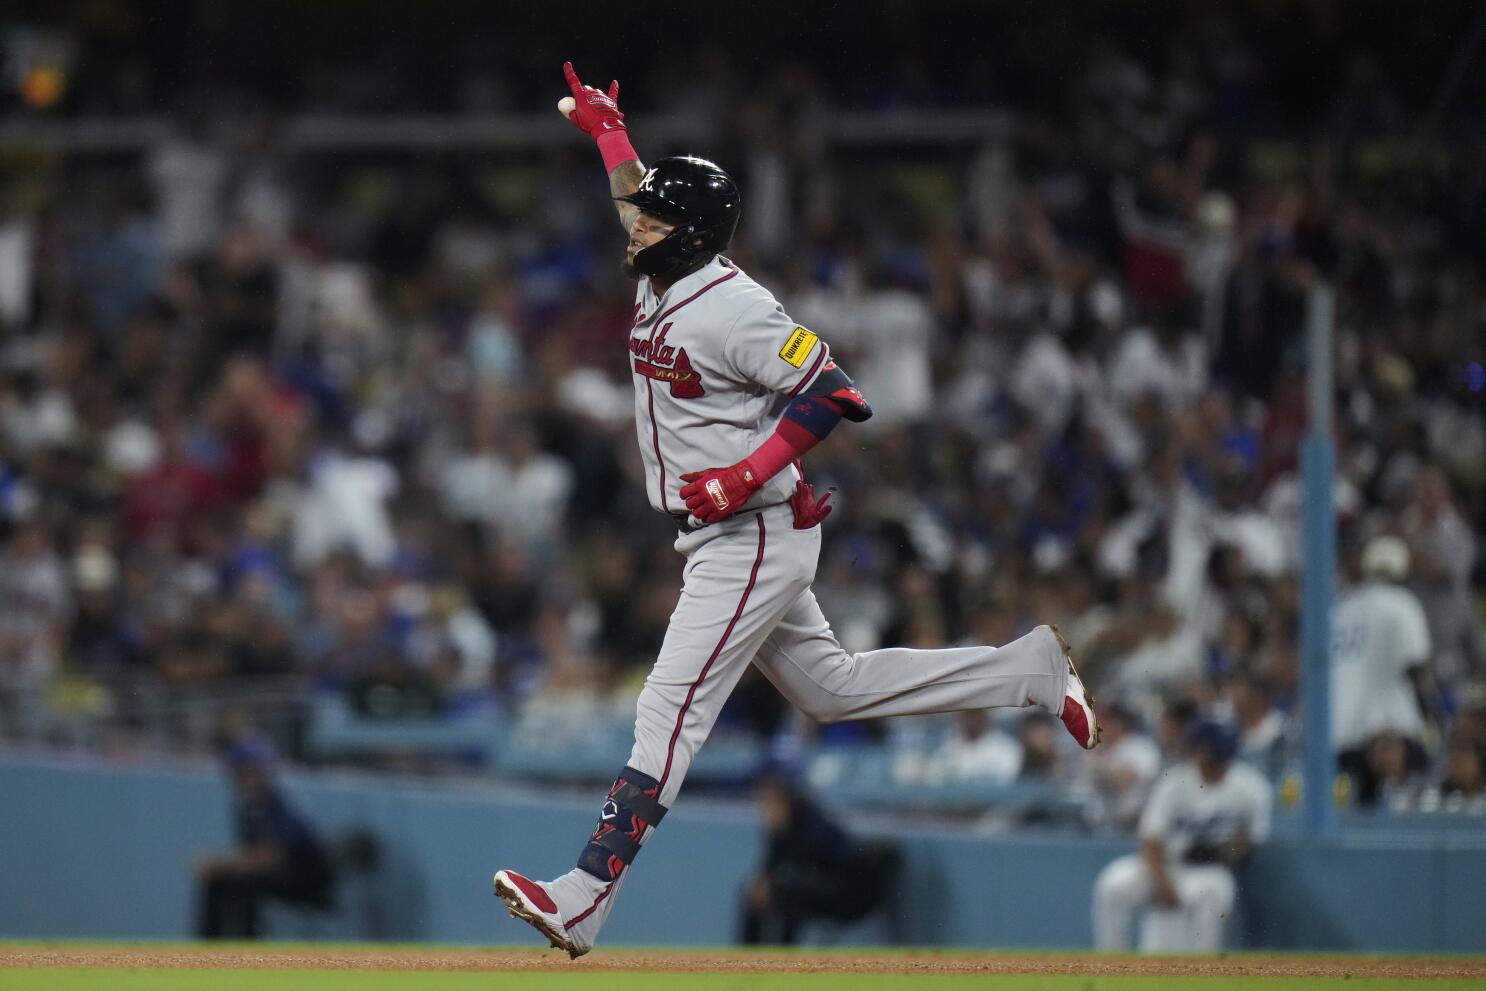 Dodgers postgame: Dave Roberts compares pitching to Braves' staff, honoring  Kobe Bryant & more 